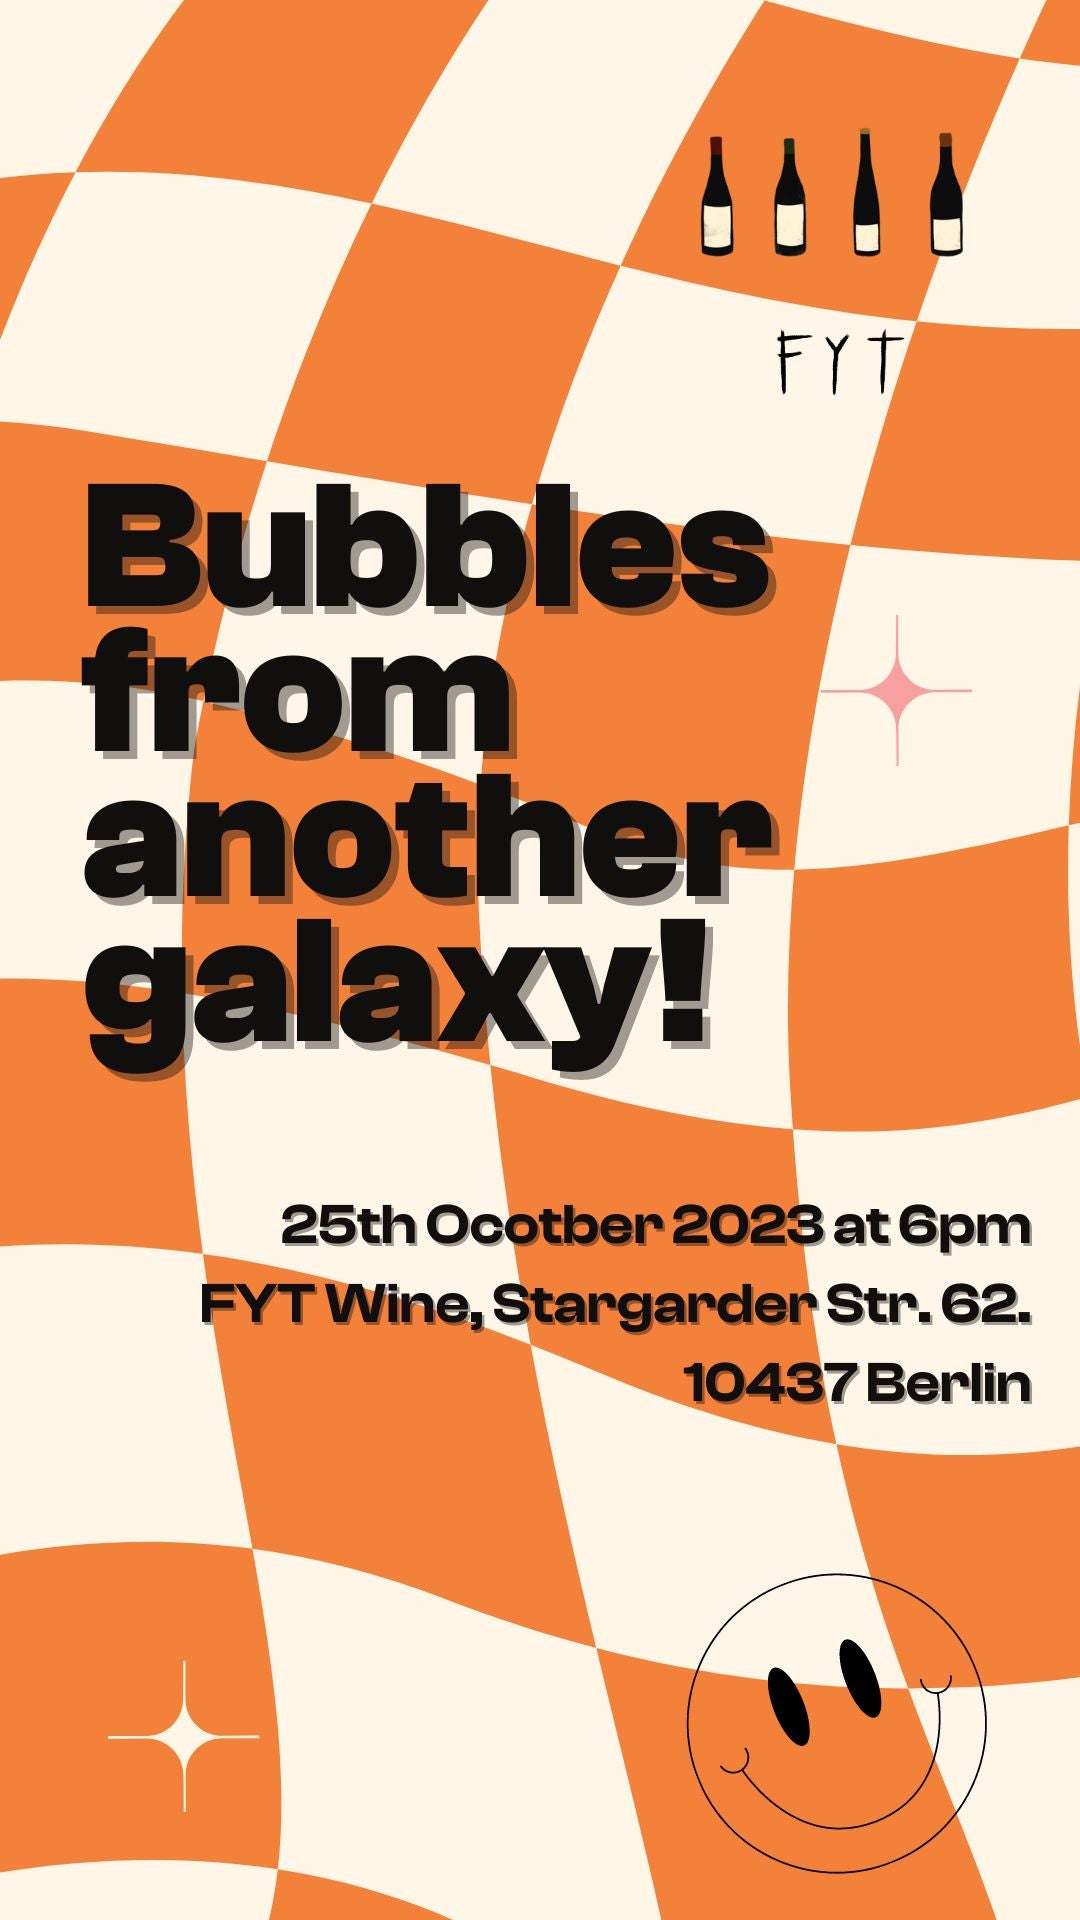 Bubbles from another galaxy! Wednesday 25th October